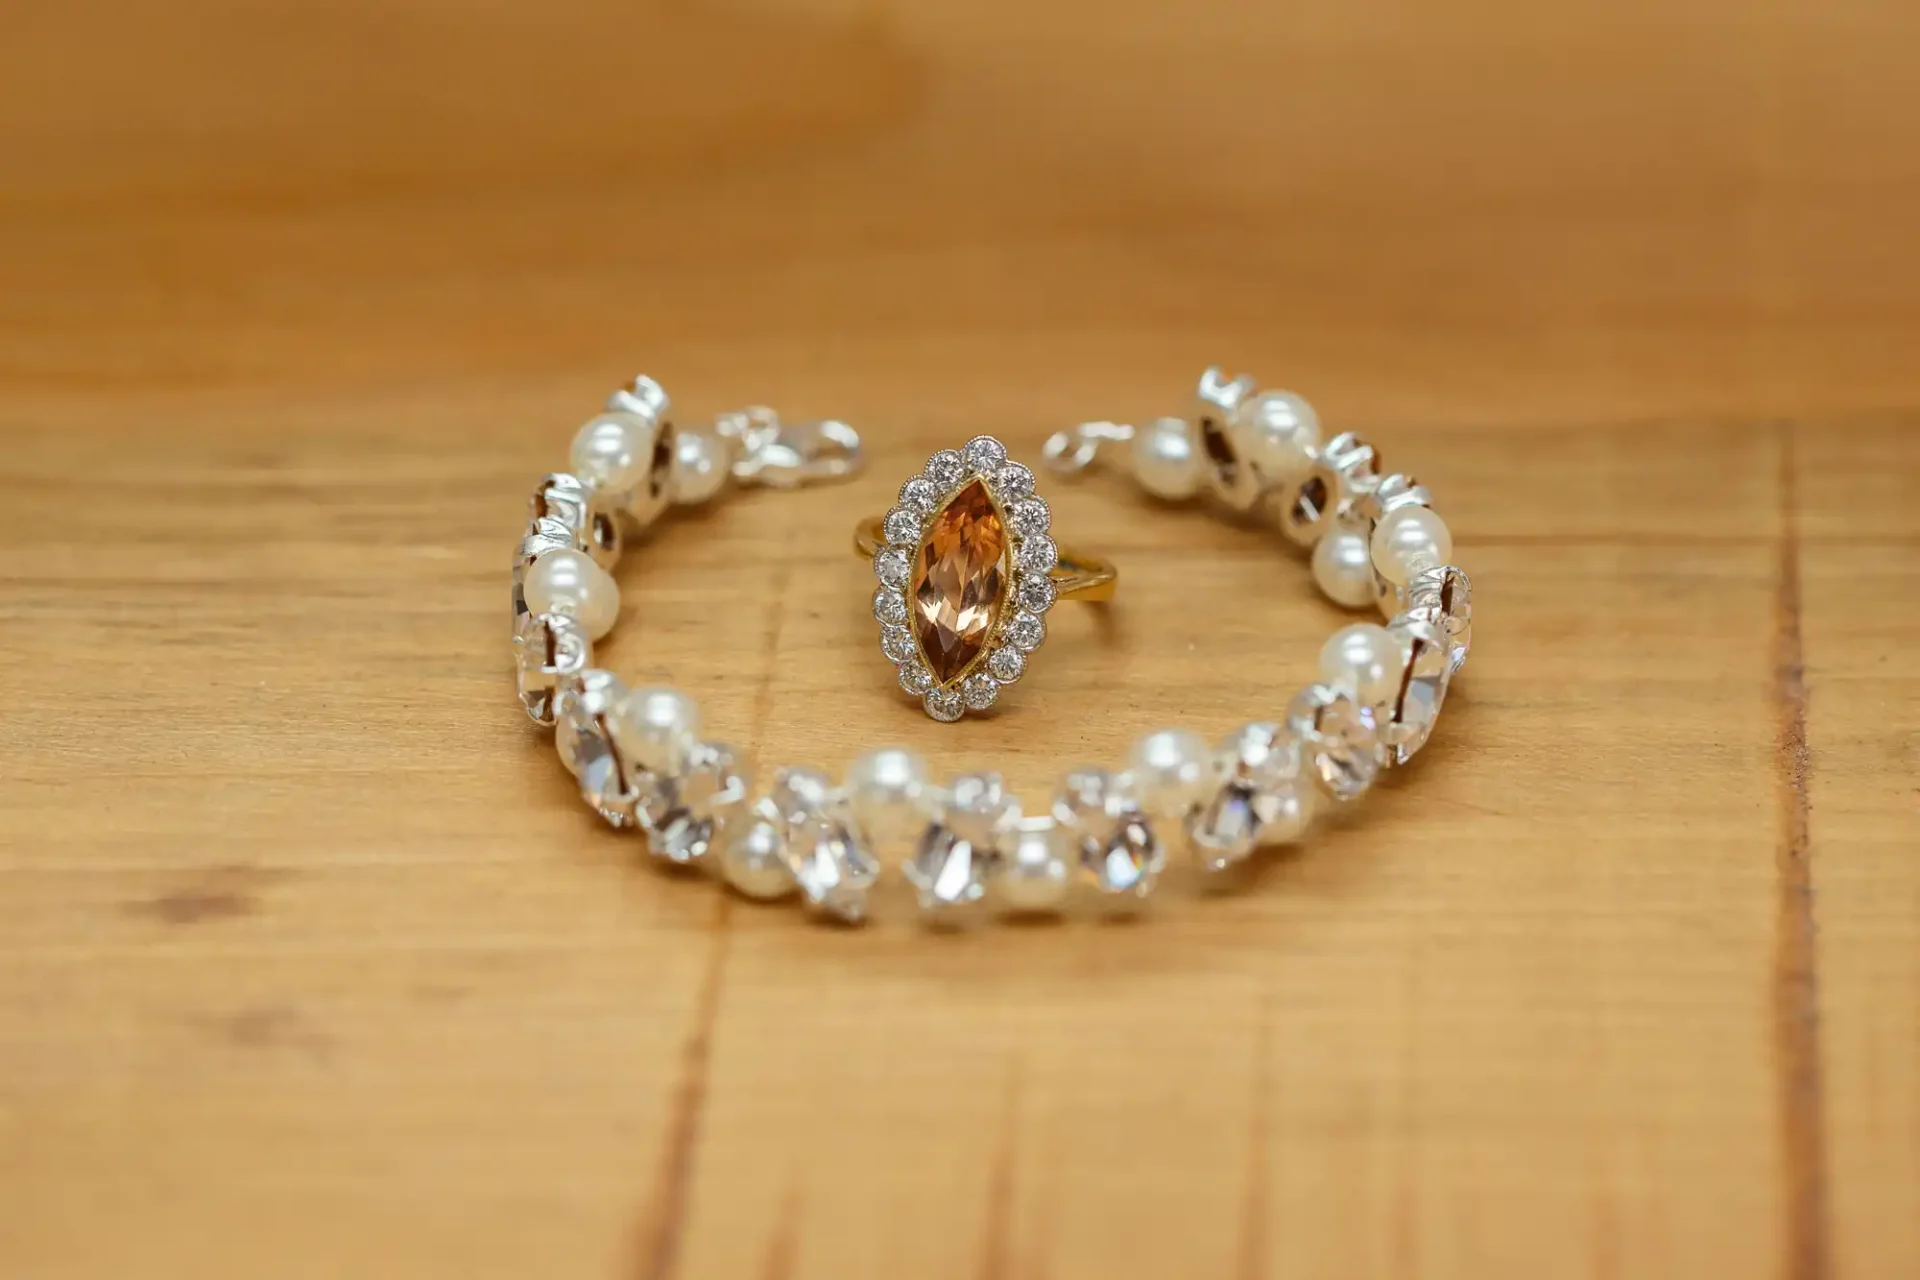 A pearl and crystal bracelet alongside a gold ring with an oval amber gemstone, displayed on a wooden surface.